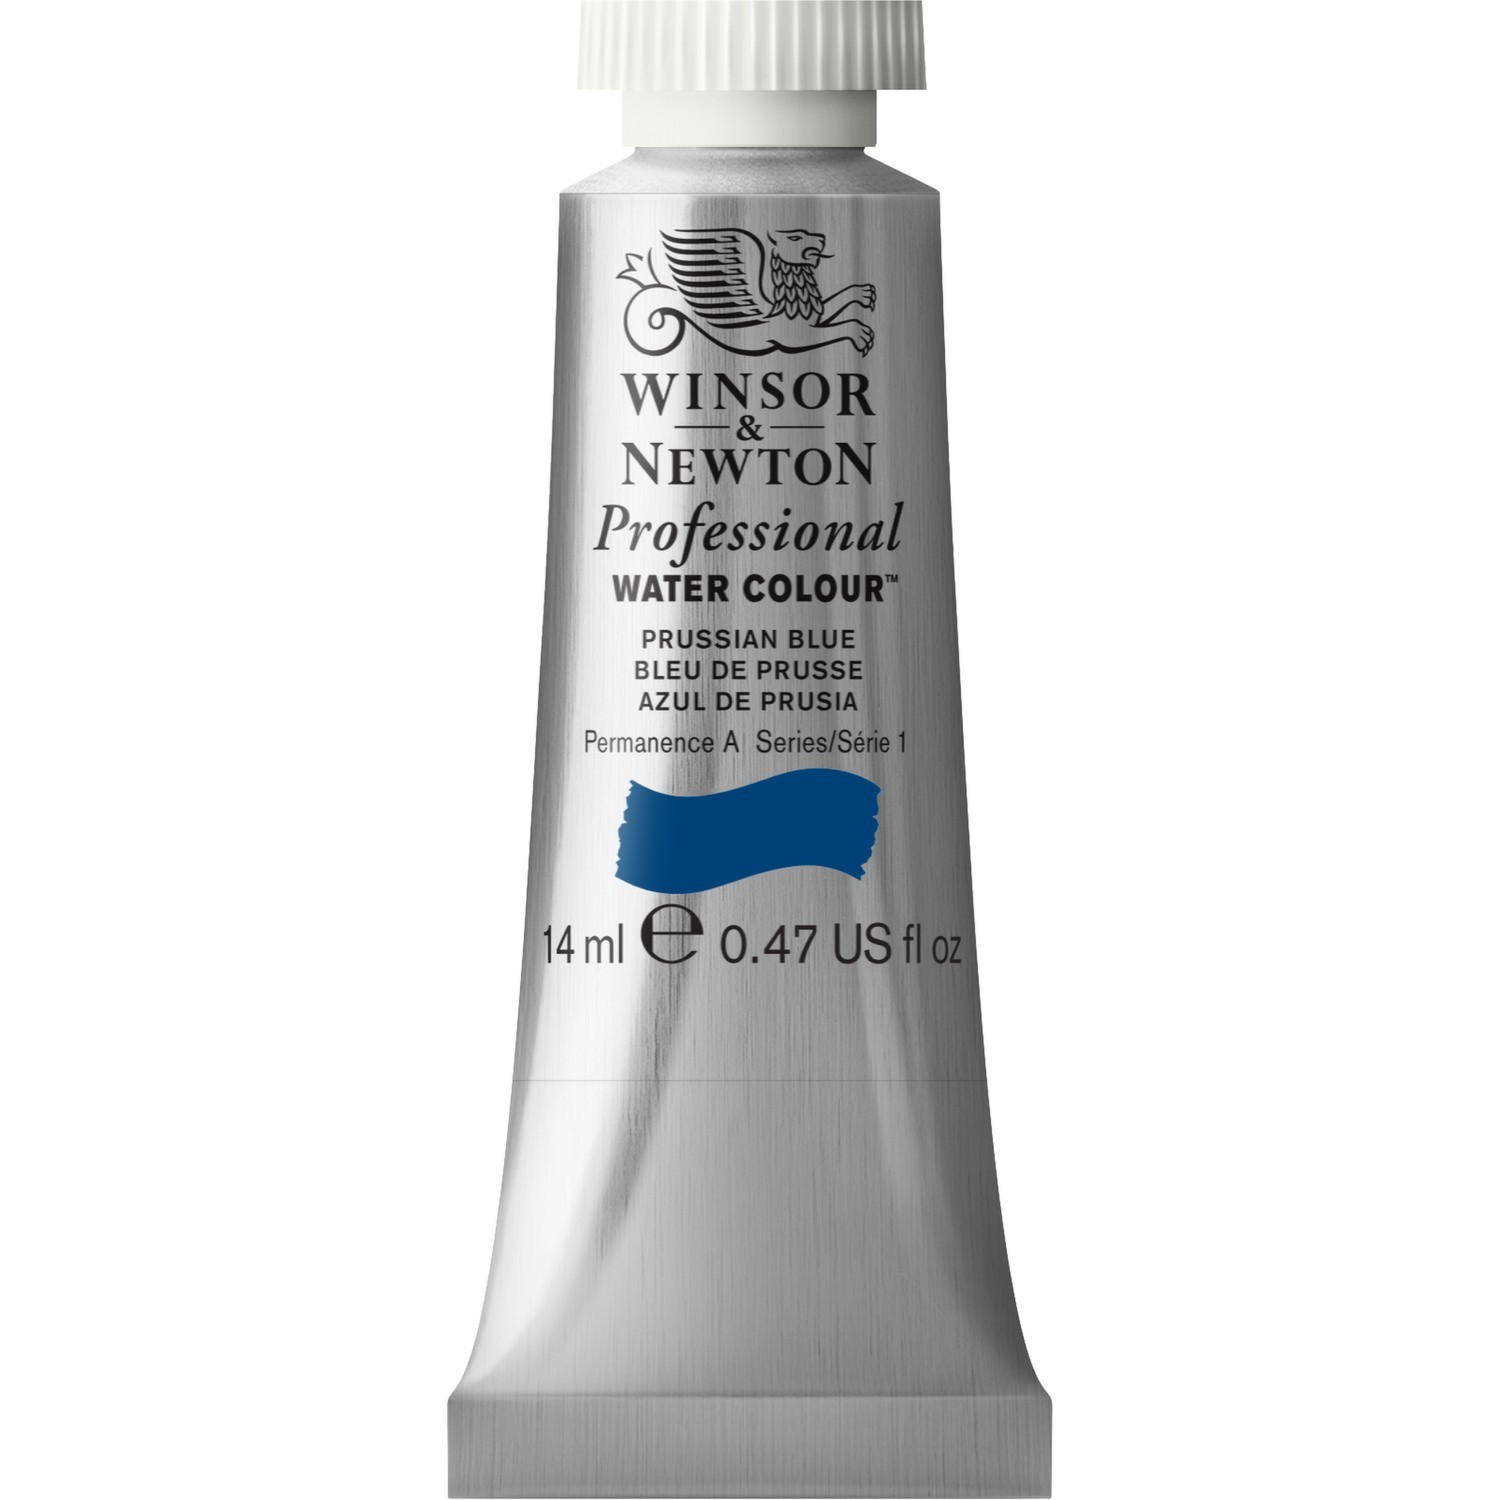 Winsor and Newton 14ml Professional Watercolour Paint - Prussian Blue Image 1